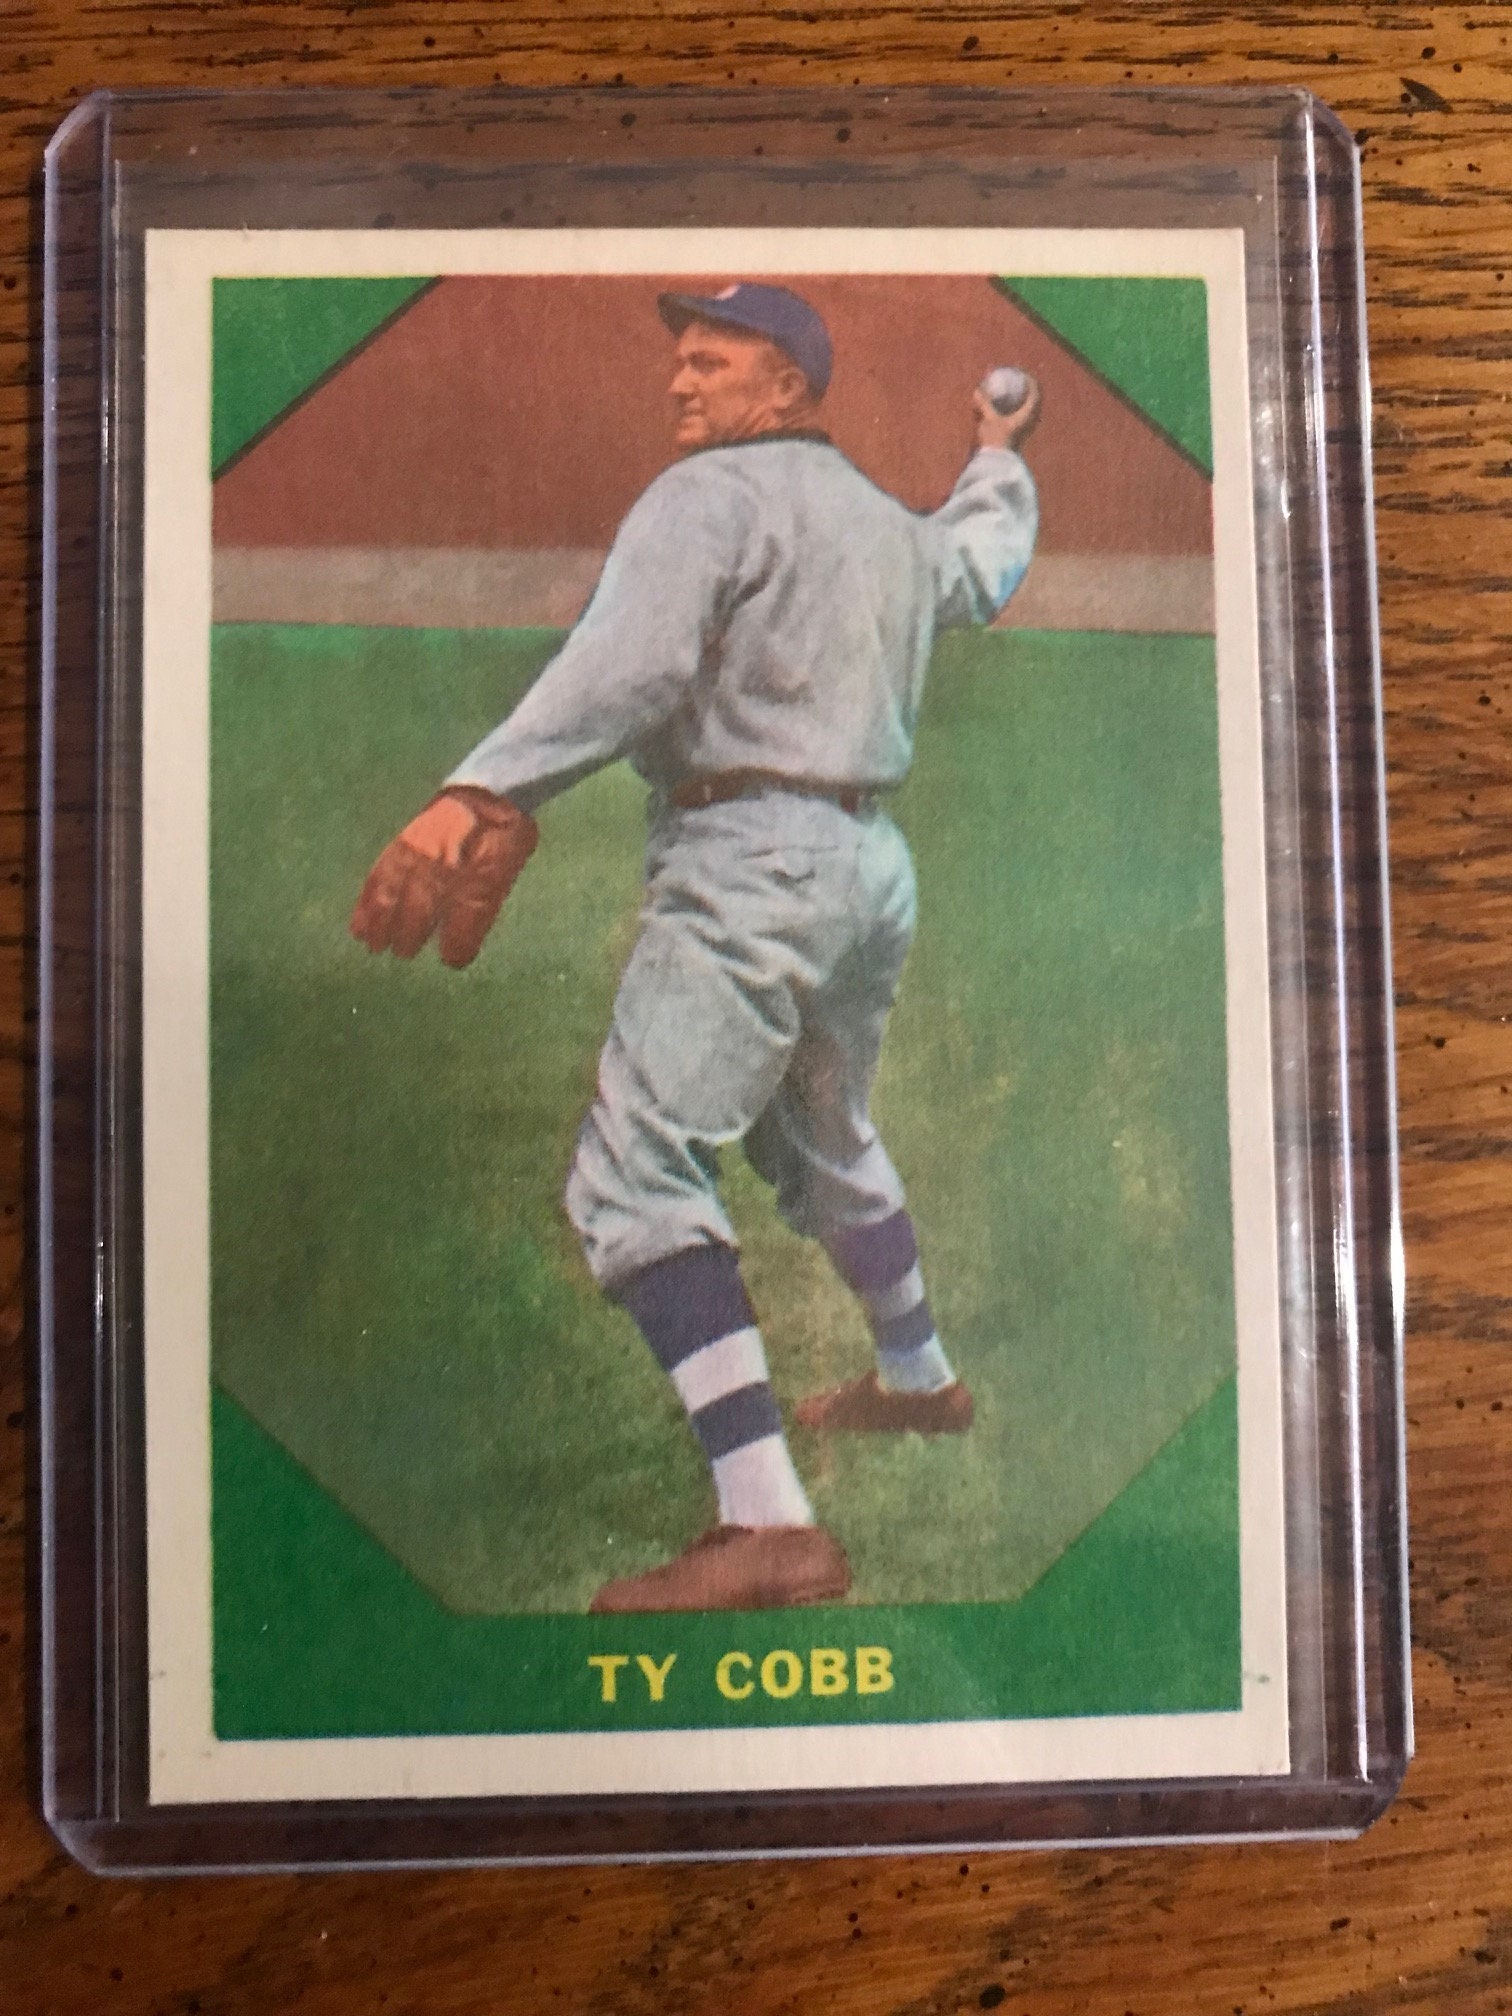 Ty Cobb 1960 Fleer Baseball Card (As Pictured) (Original Issue) (0490)